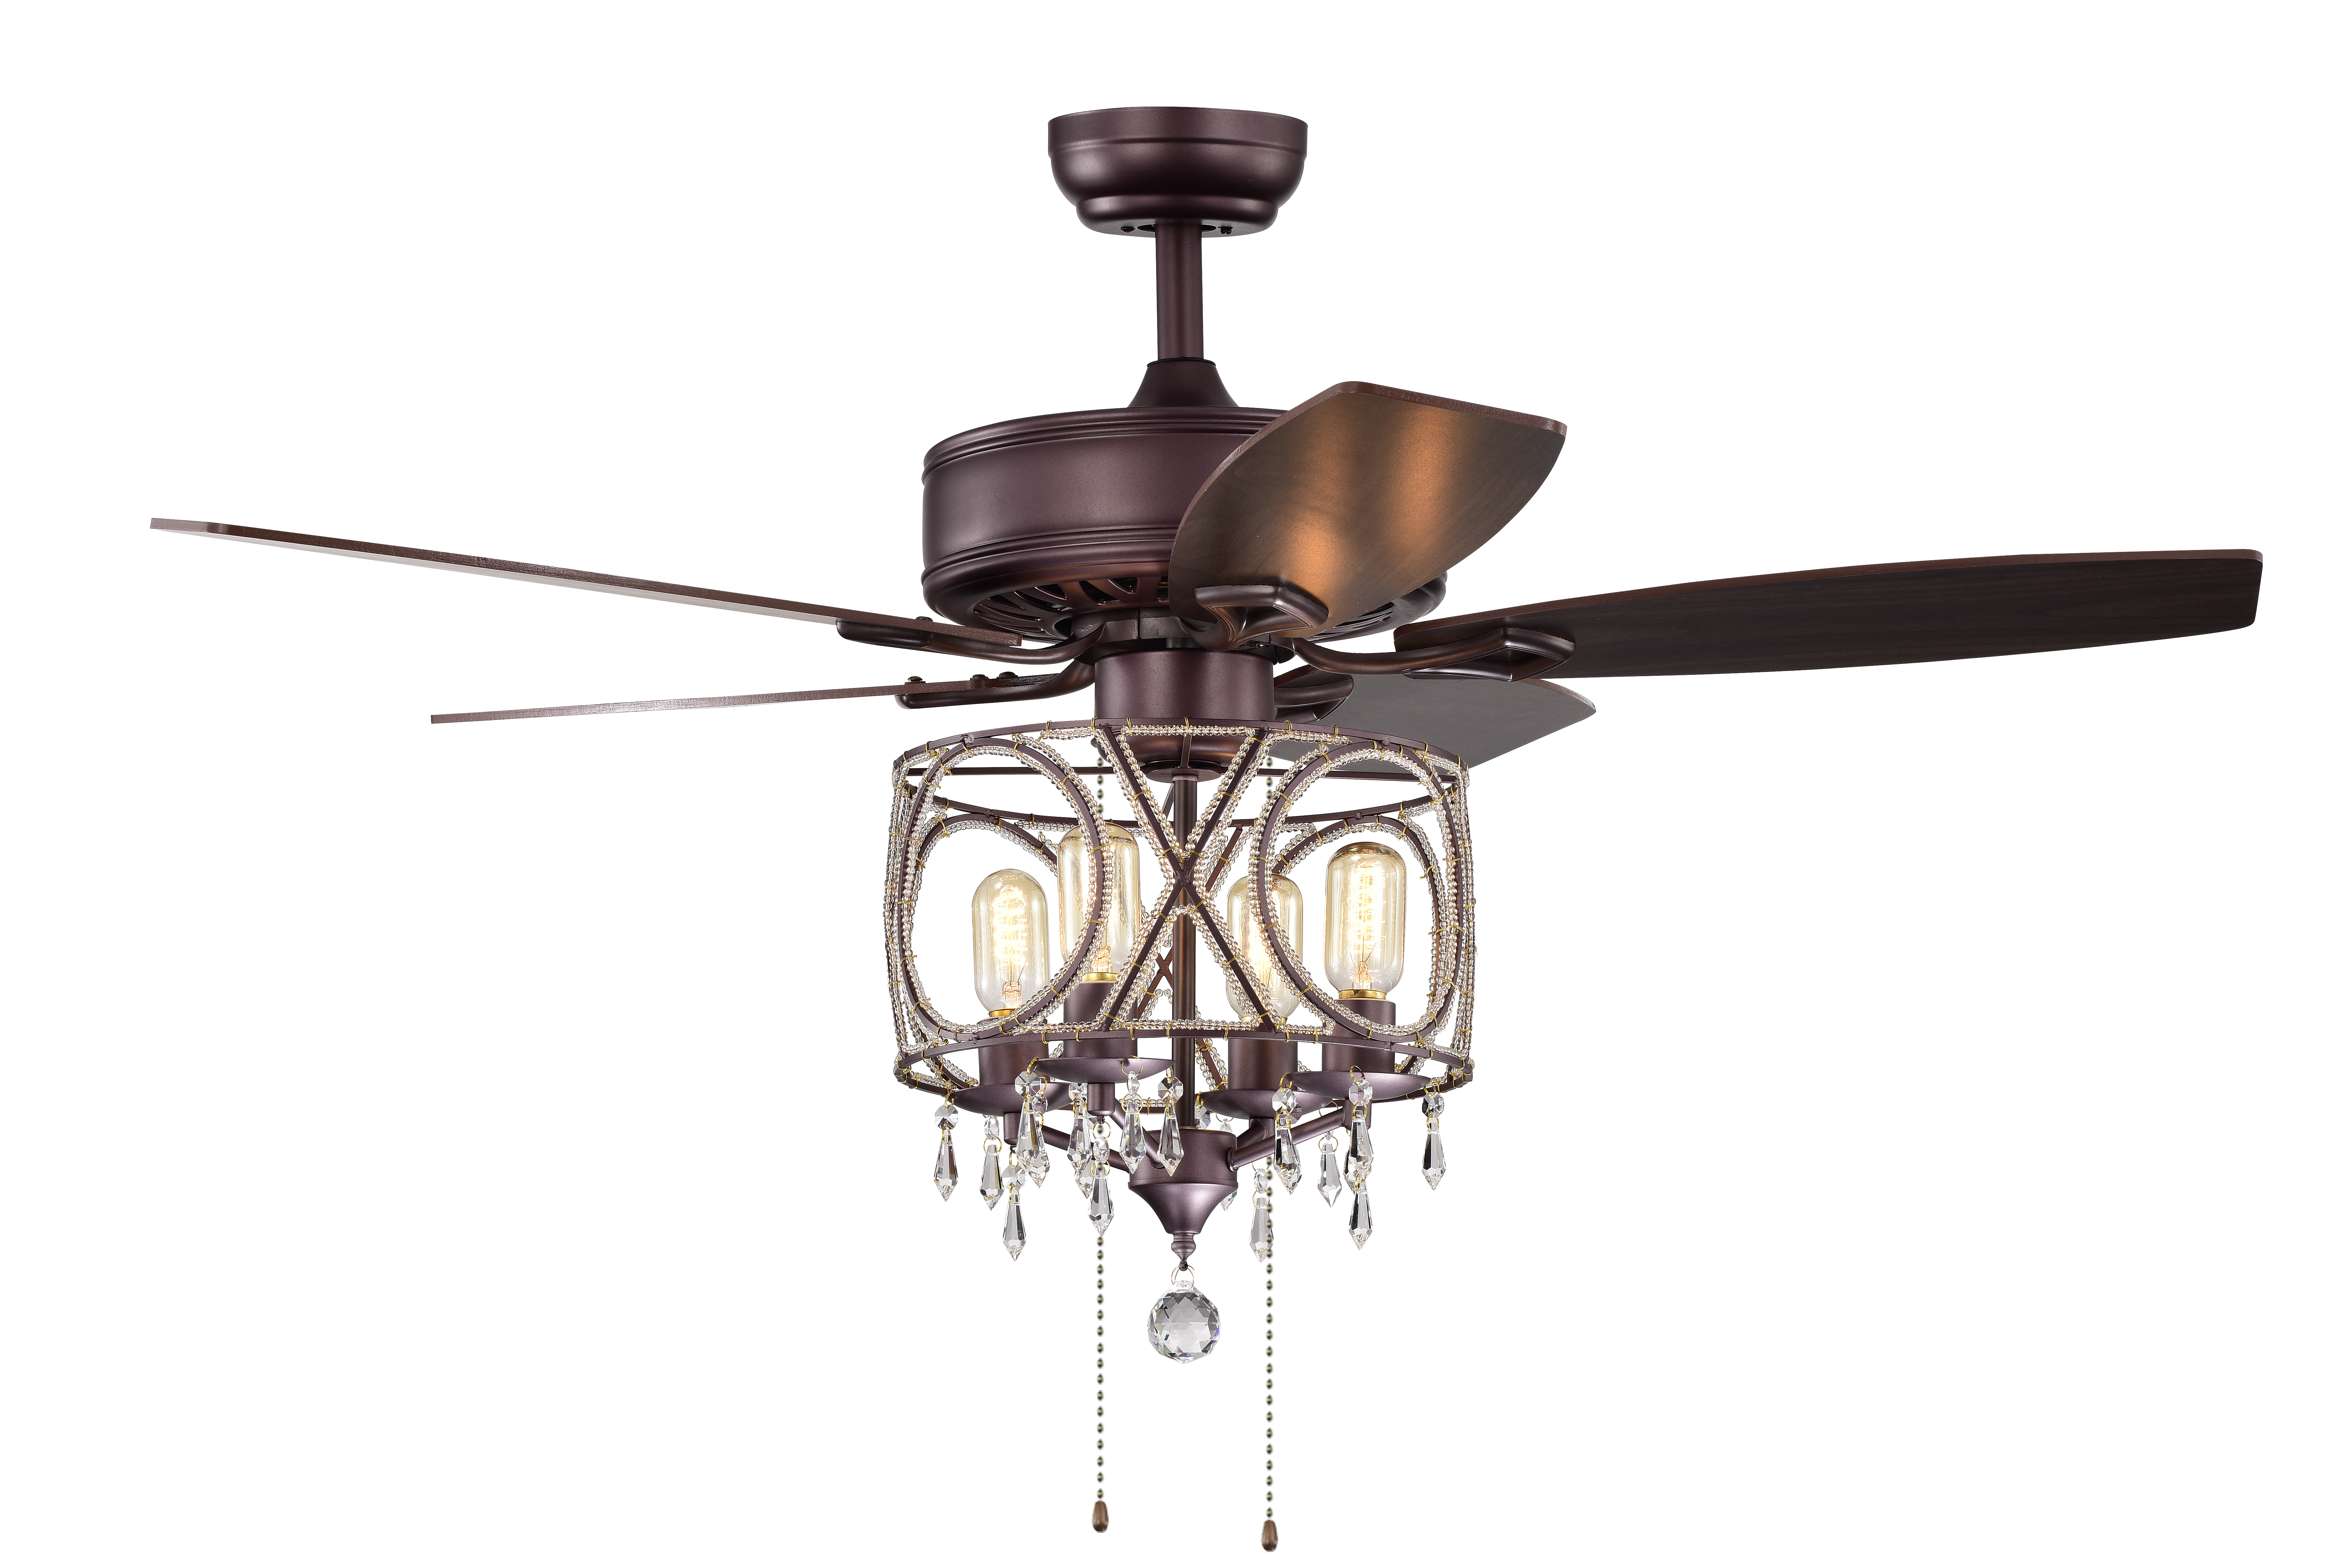 Treehouse NY 52" Capella 5 Blade Chandelier Ceiling Fan with Pull Chain and Light Kit Included